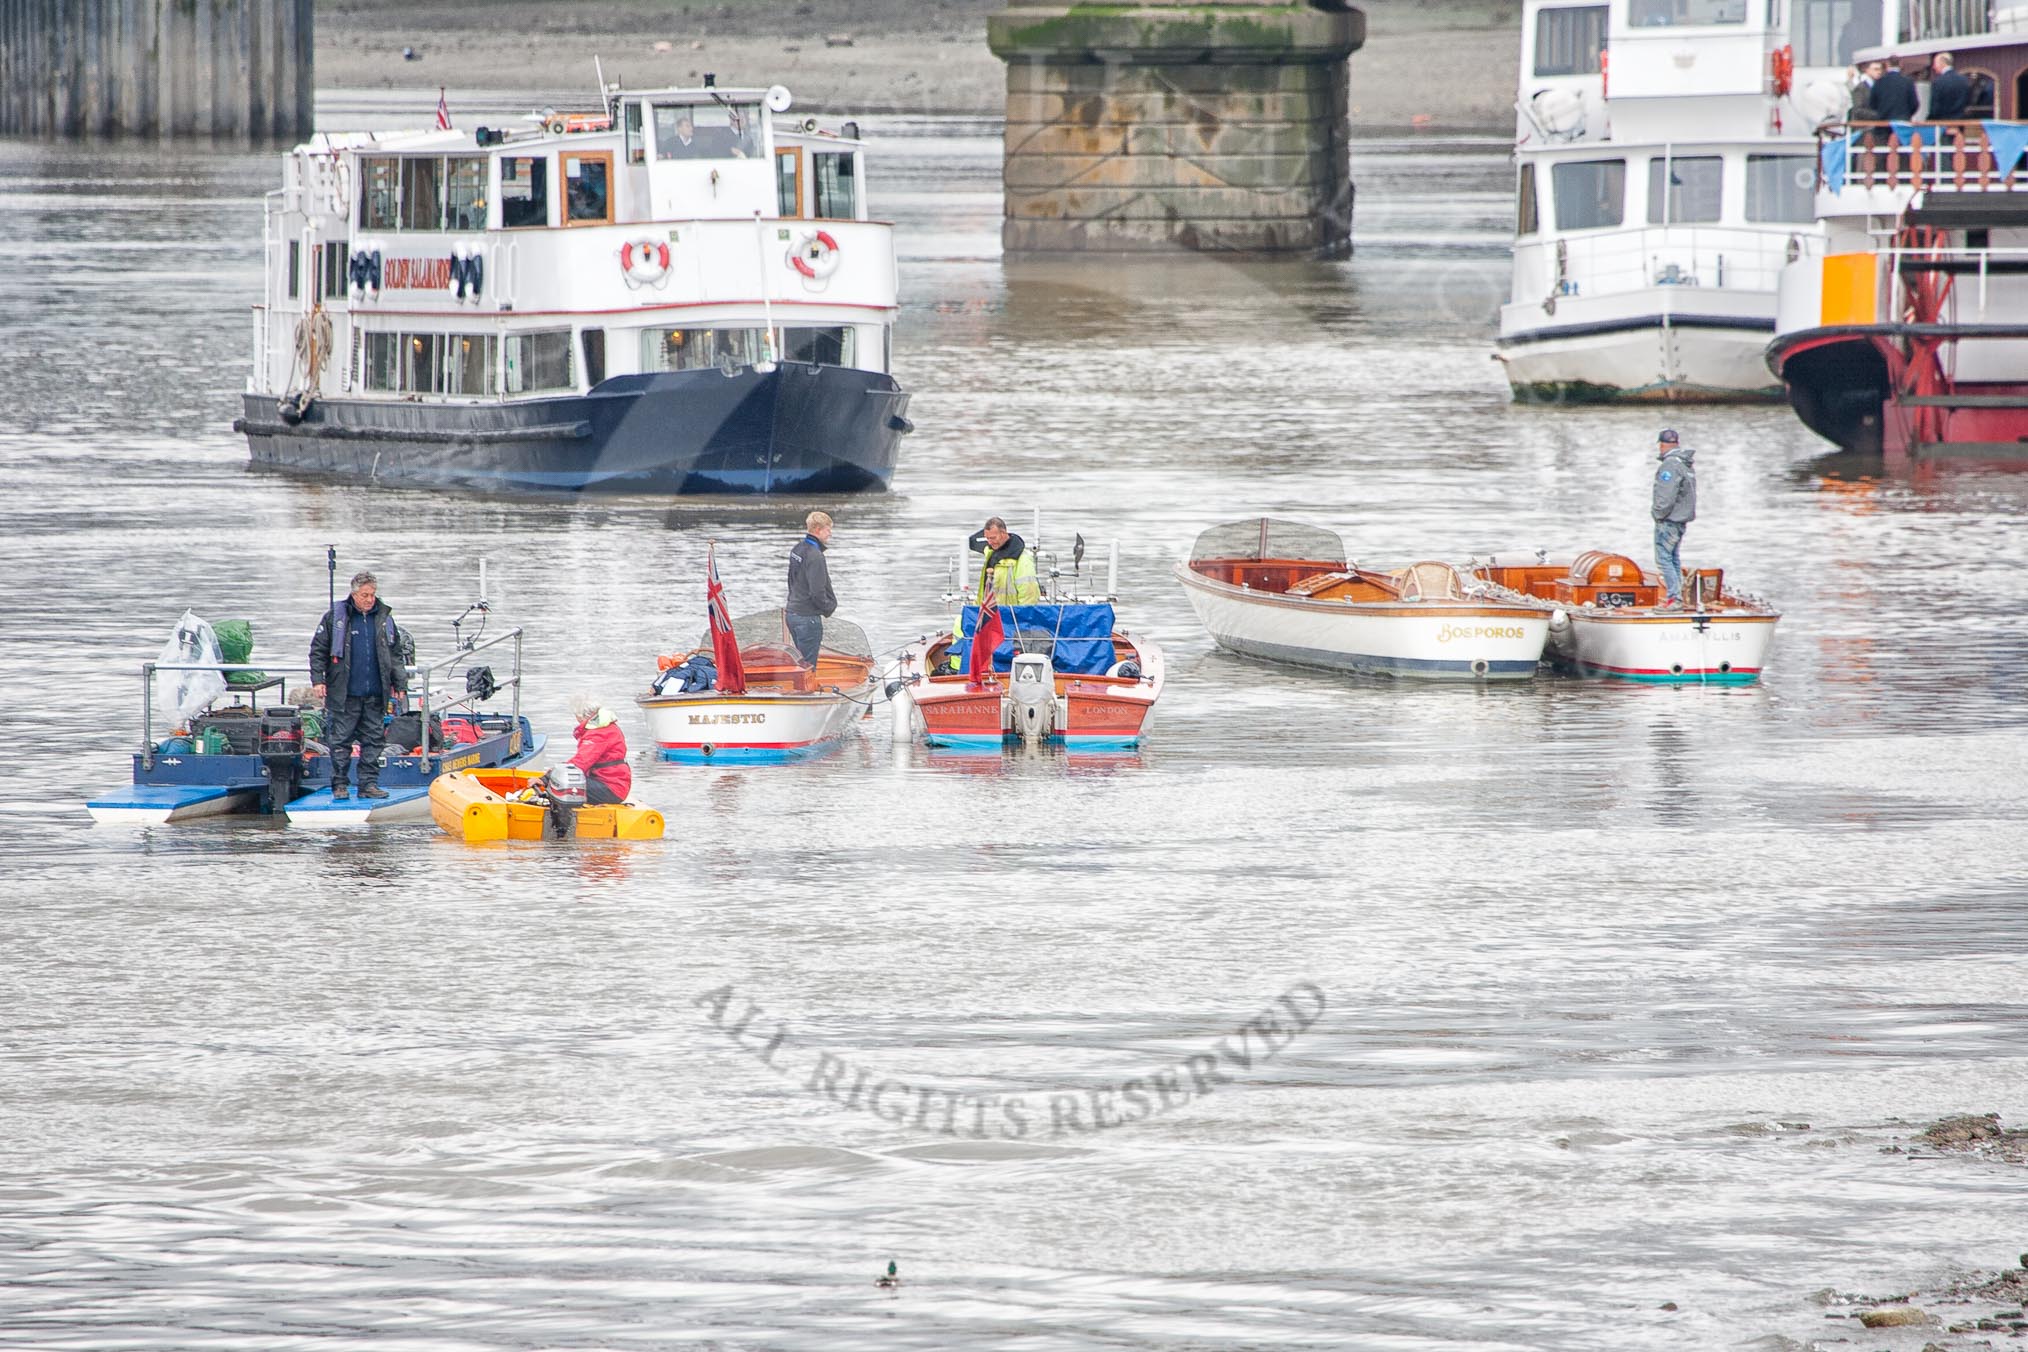 The Boat Race 2012: Setting the scene for the 2012 Boat Race: The flotilla of Thames launches to follow the Boat Race is prepared. In the background Putney Bridge, on the left Golden Salamander, a passenger boat from http://www.ThamesExecutiveCharters.com..




on 07 April 2012 at 11:24, image #20